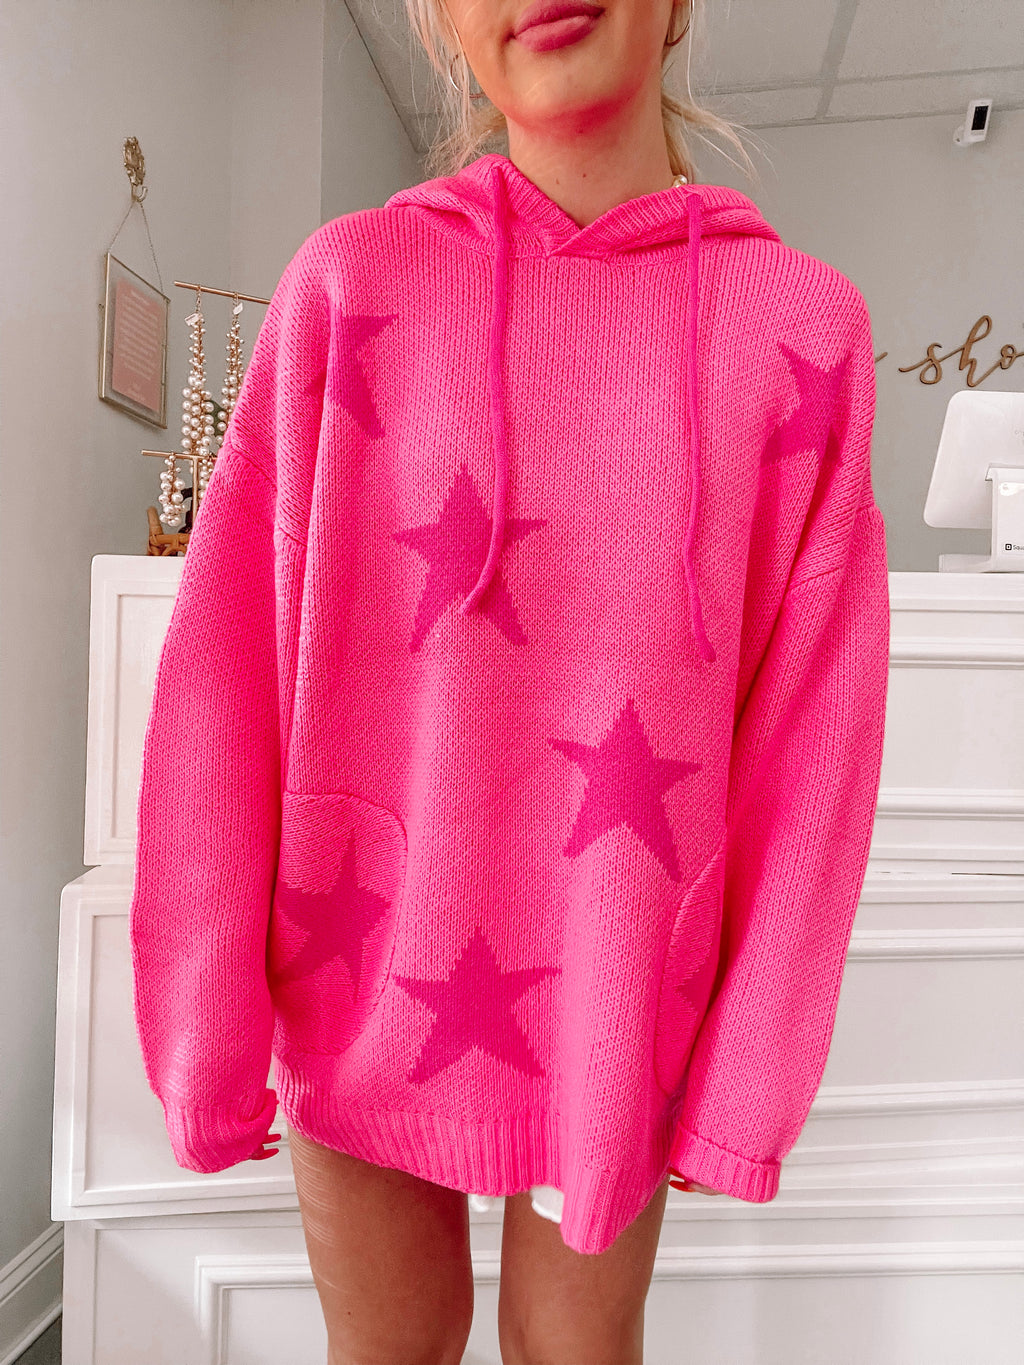 Total Domination Star Sweater